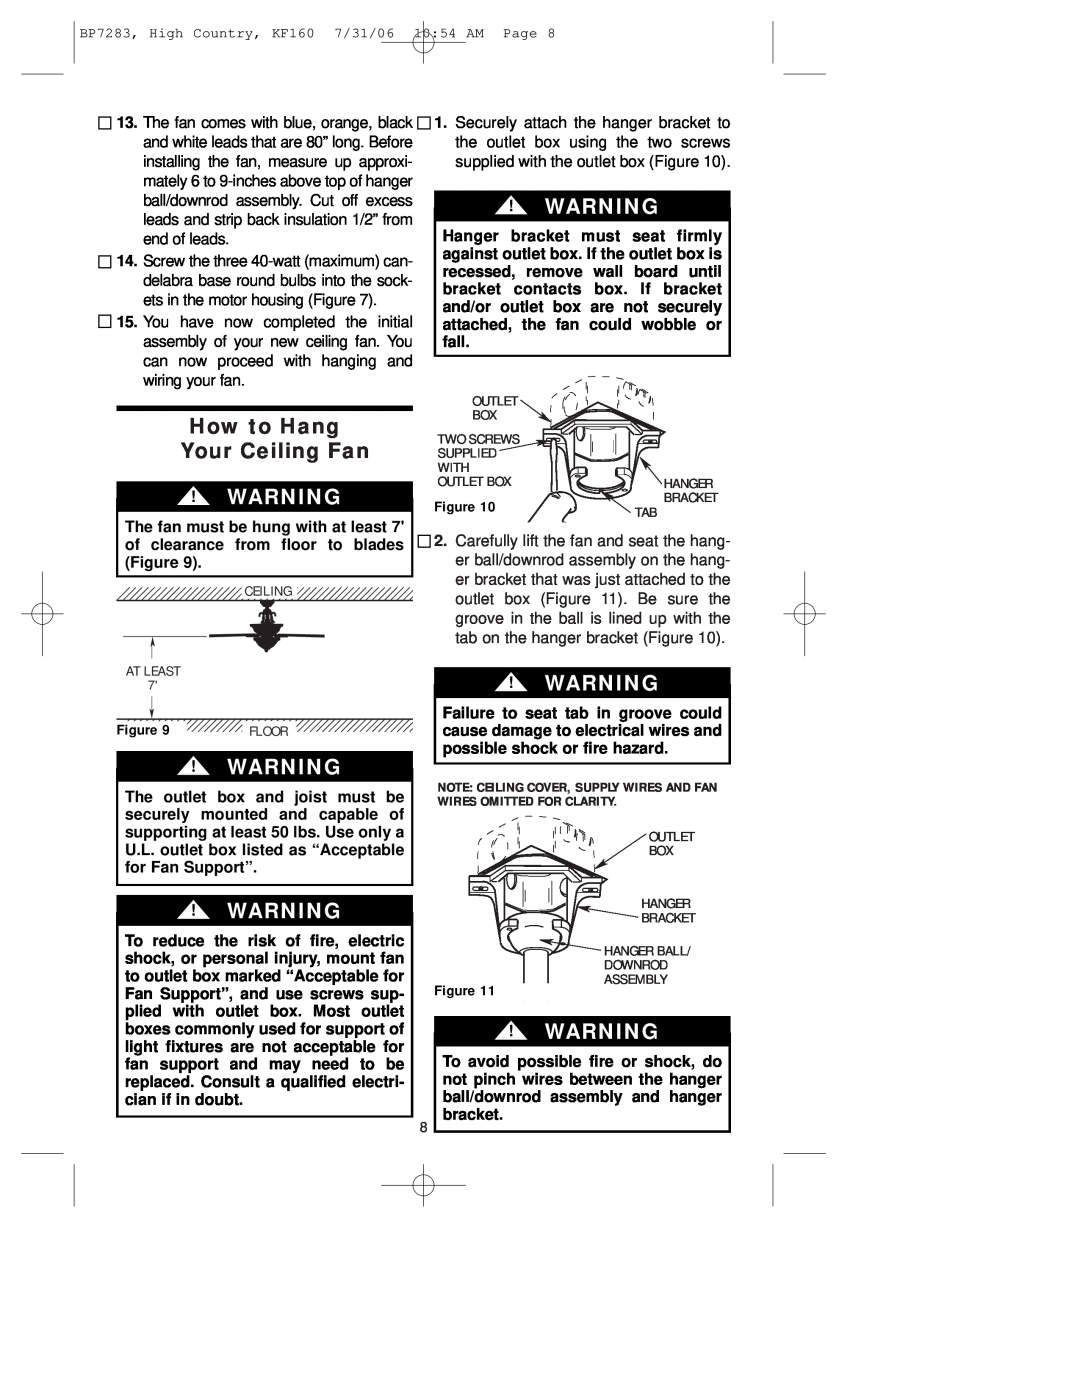 Emerson KF160OI01 owner manual How to Hang Your Ceiling Fan 